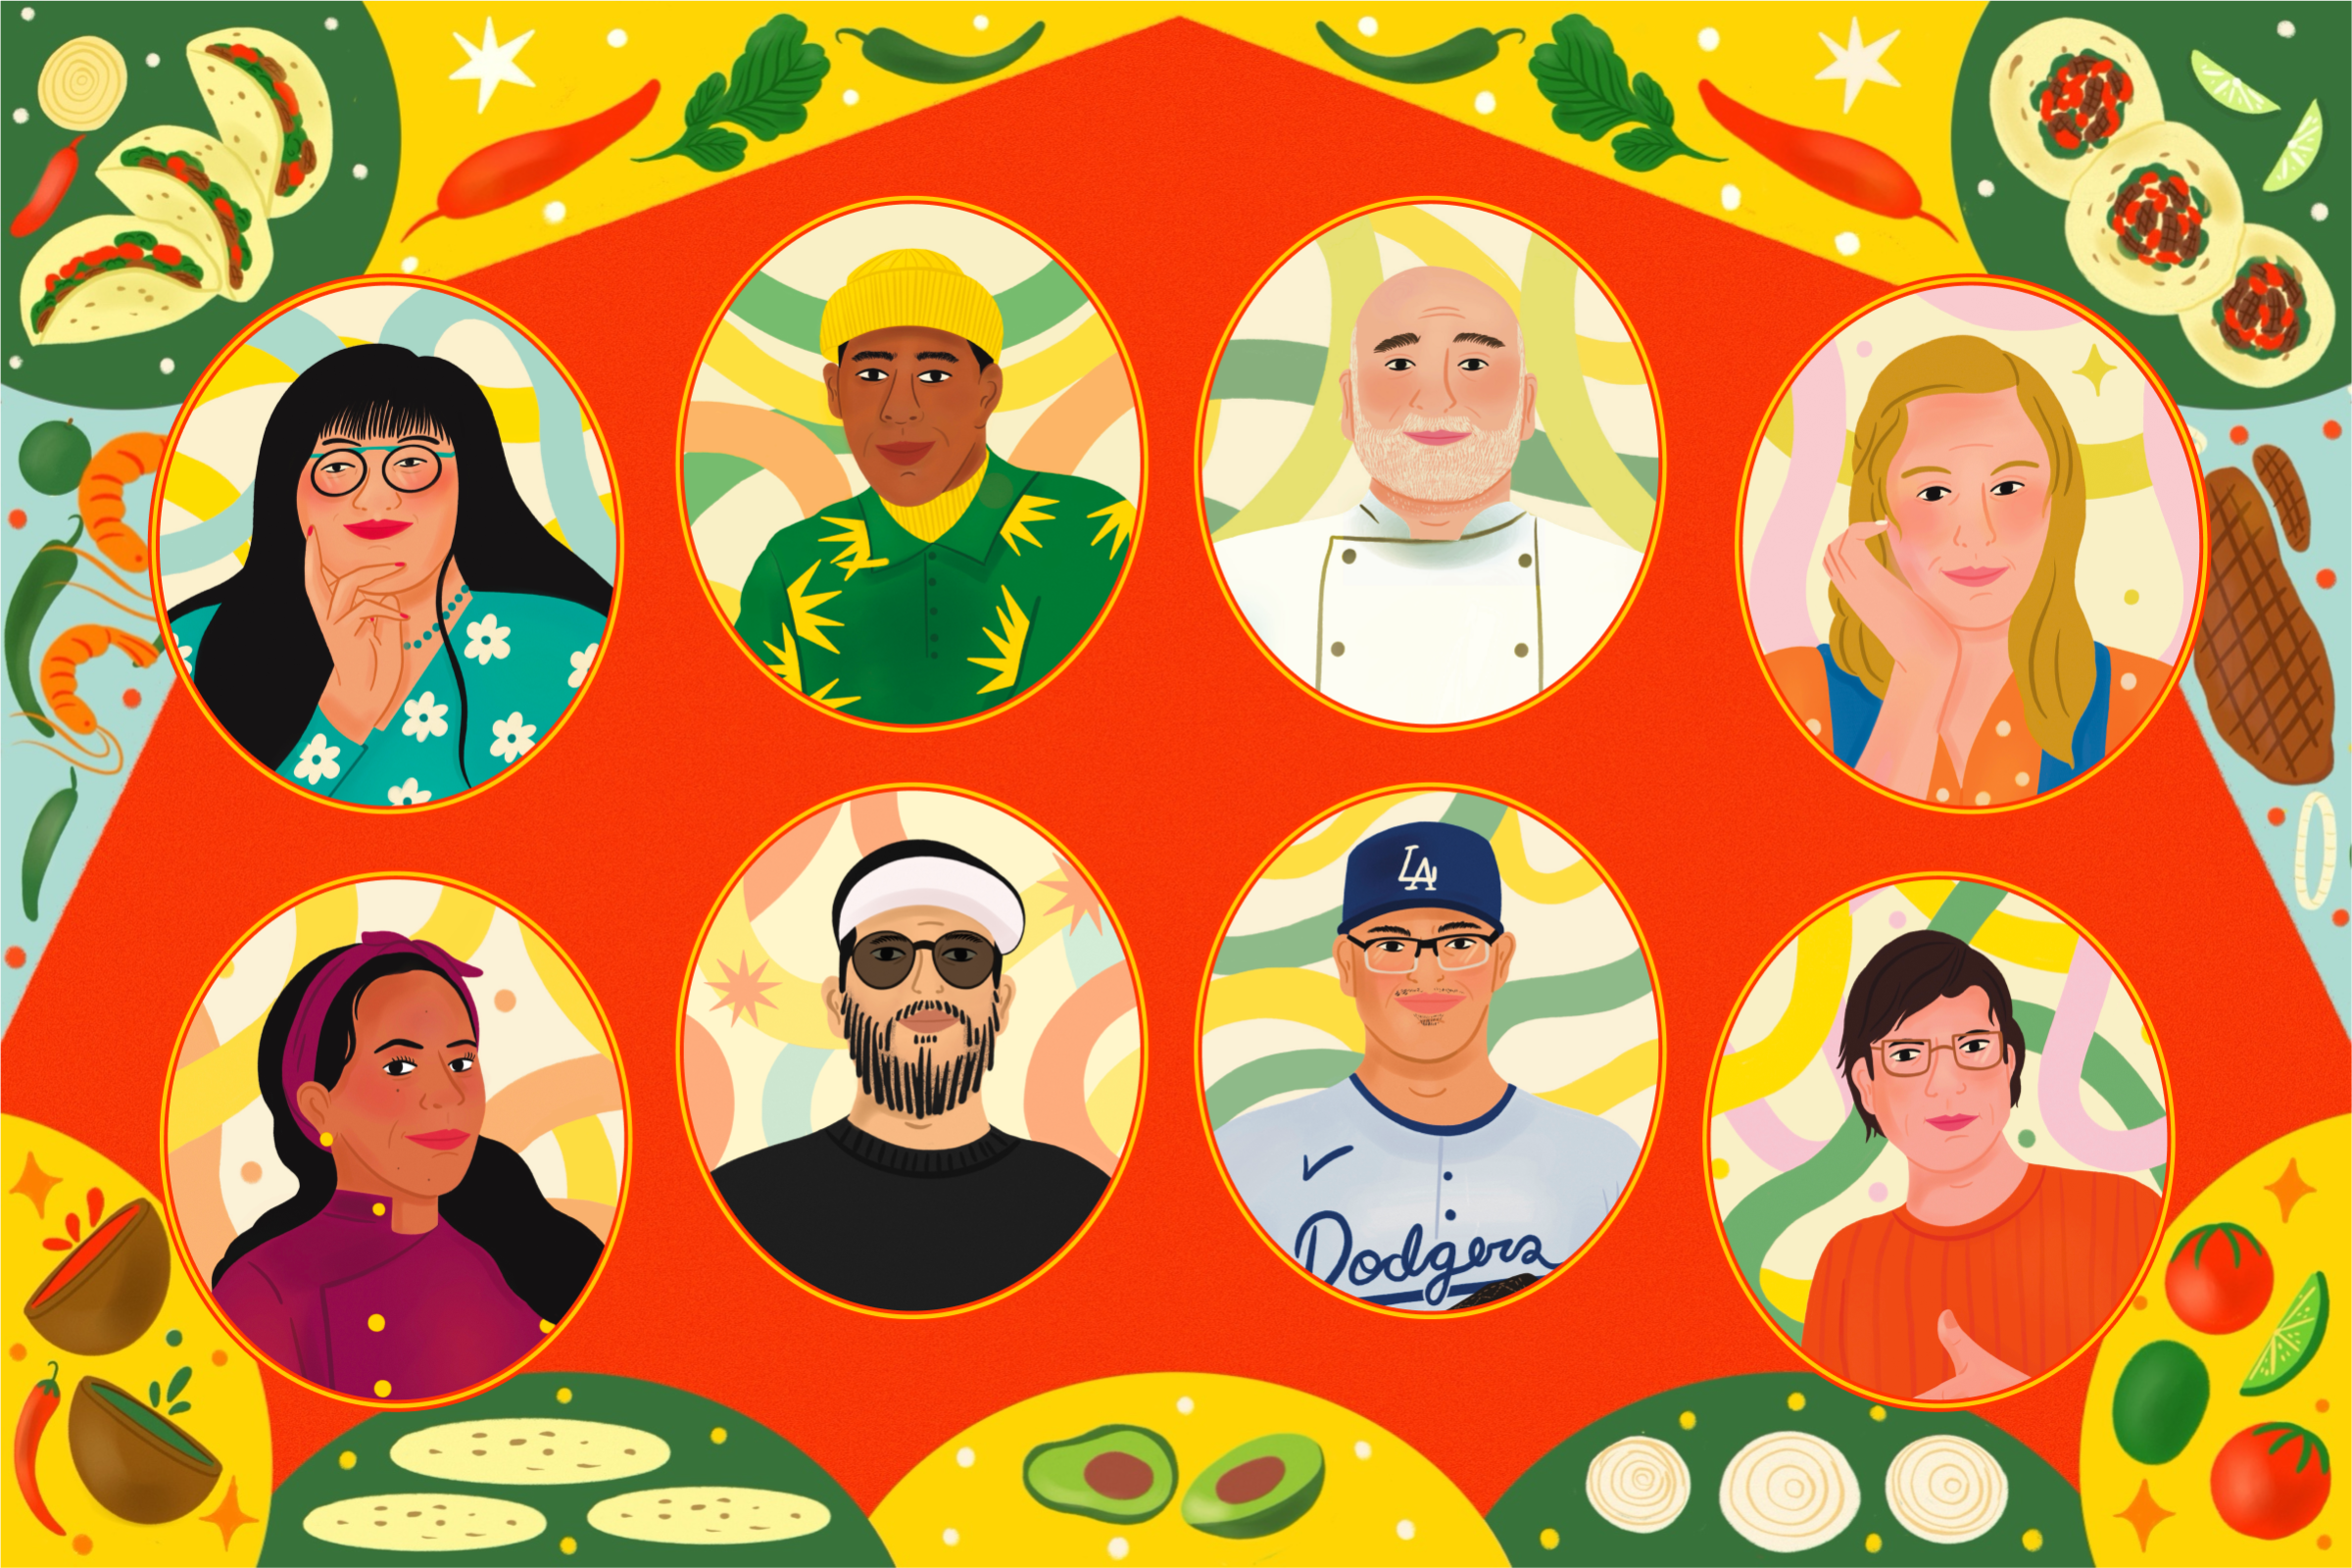 Illustrated portraits of 8 faces surrounded by taco ingredients